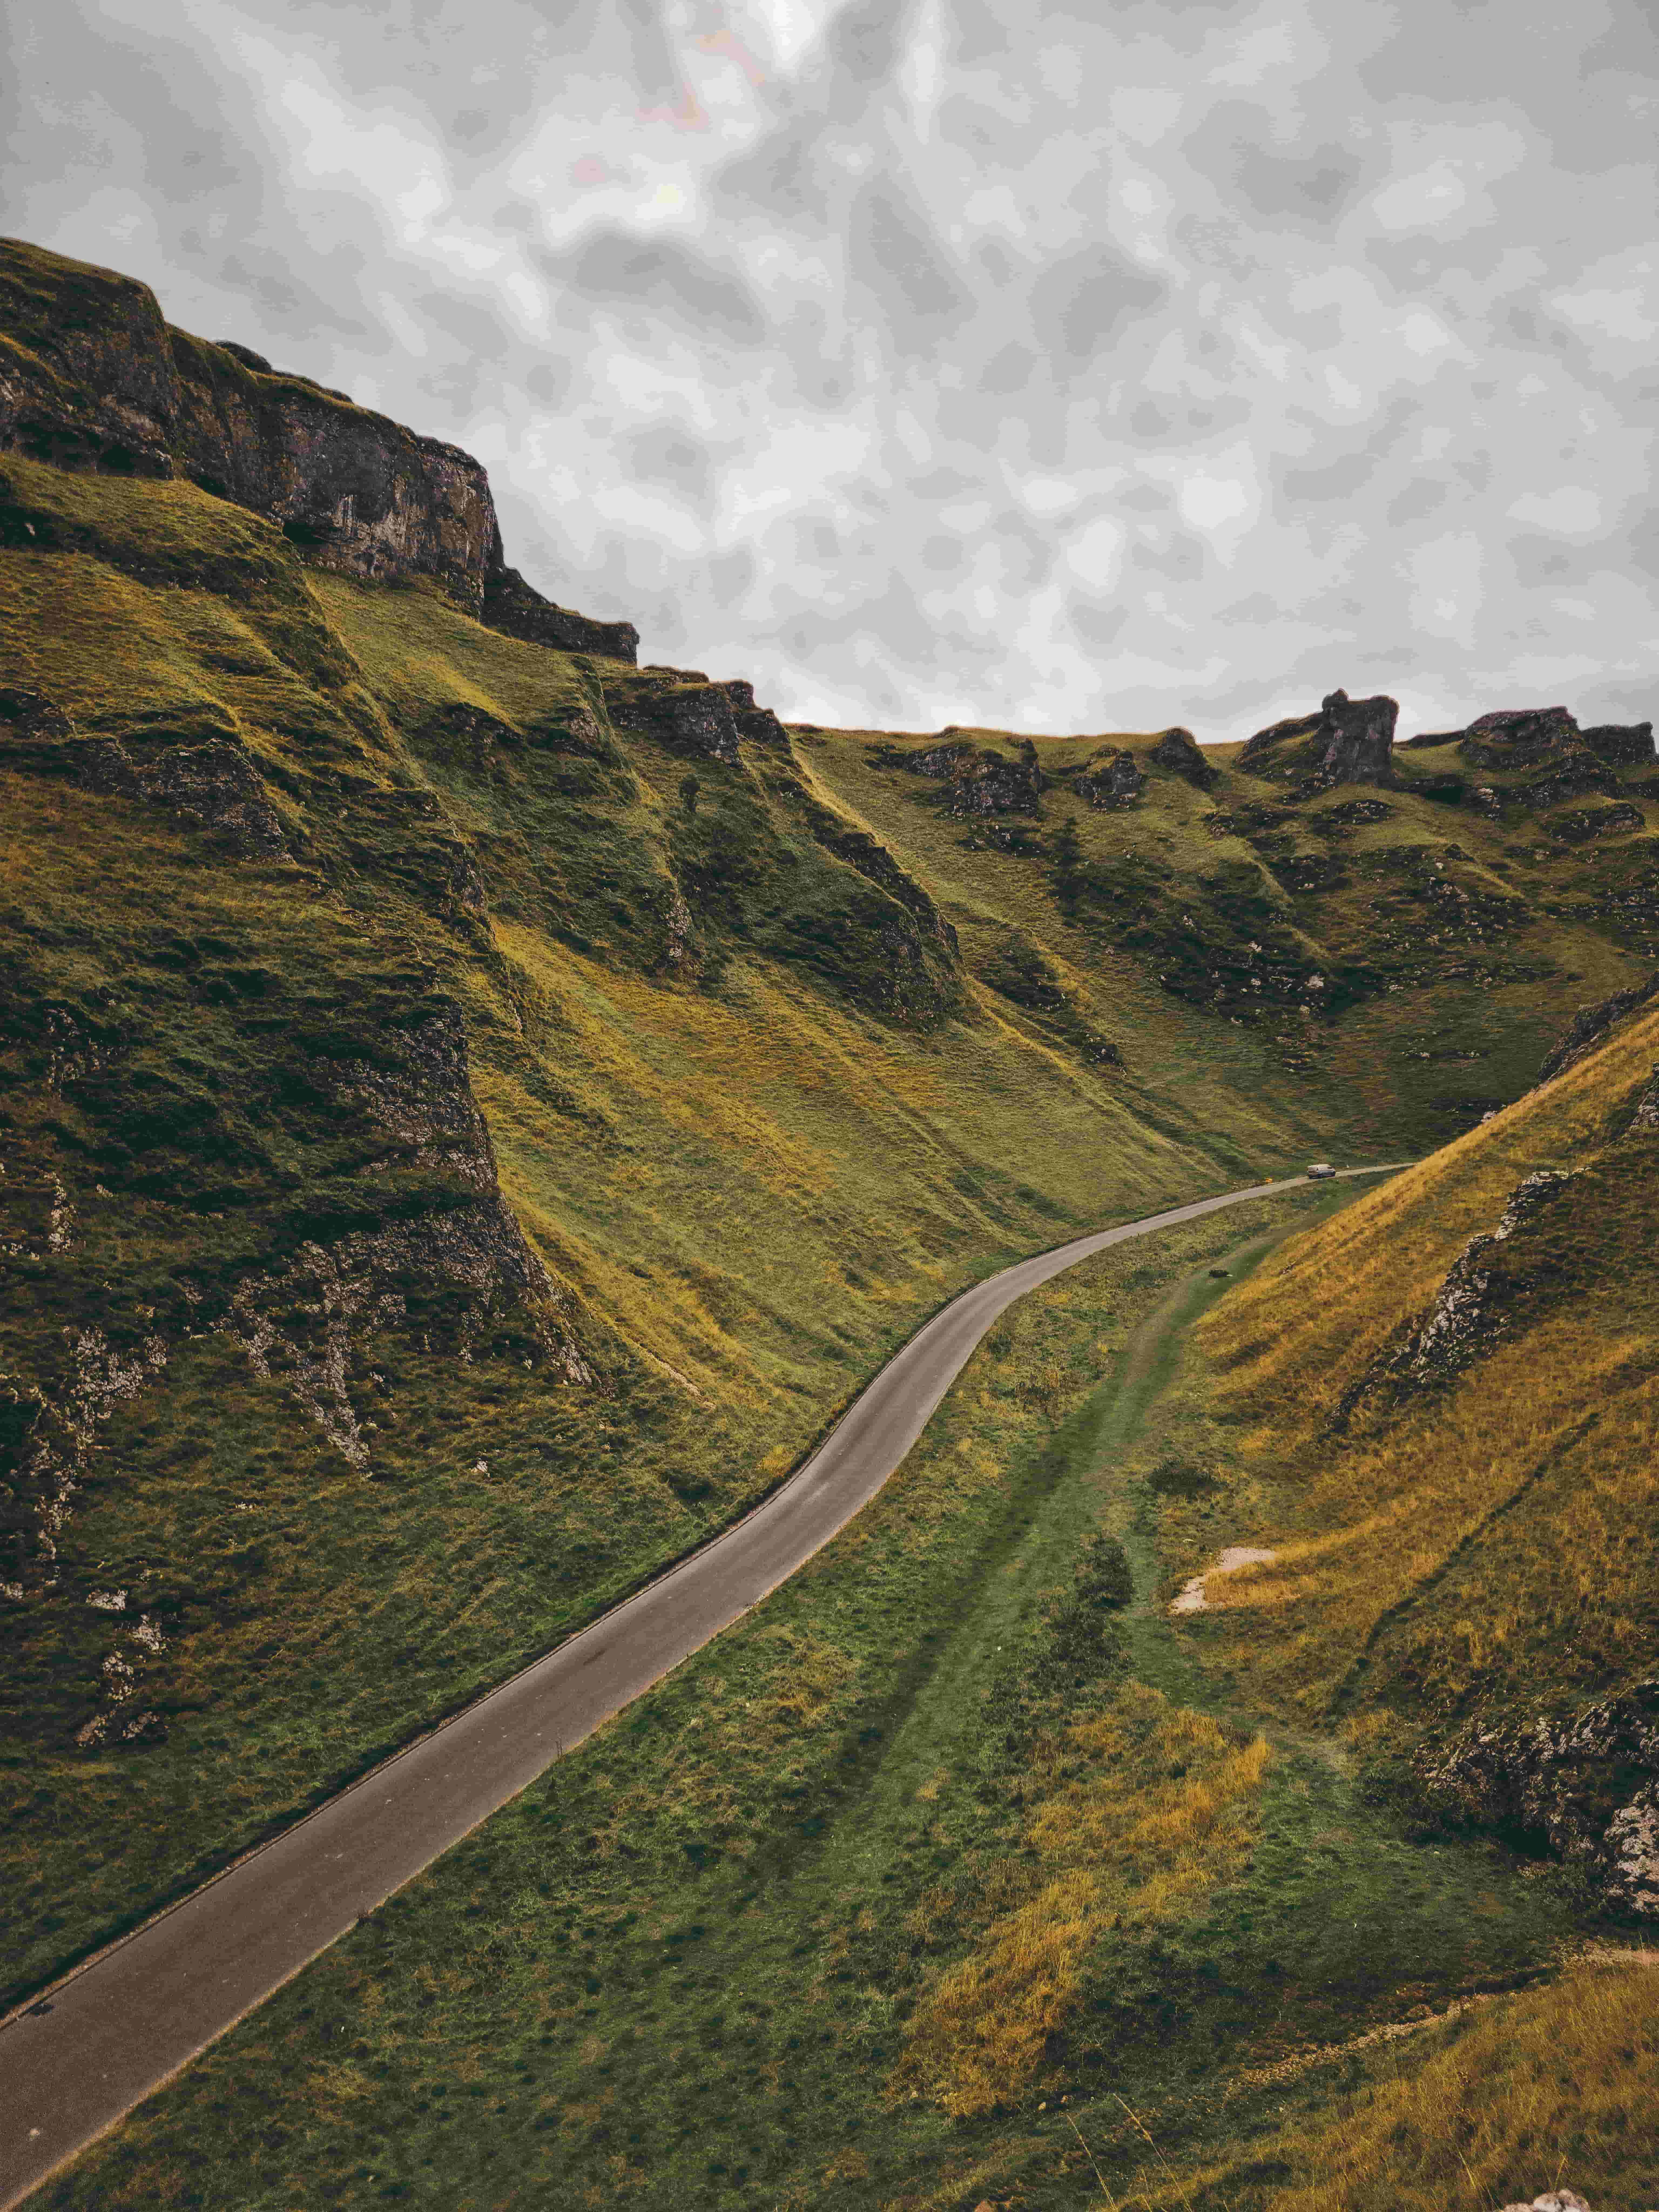 Read more about the article Peak District Exploration: Caving, Climbing, and Scenic Drives